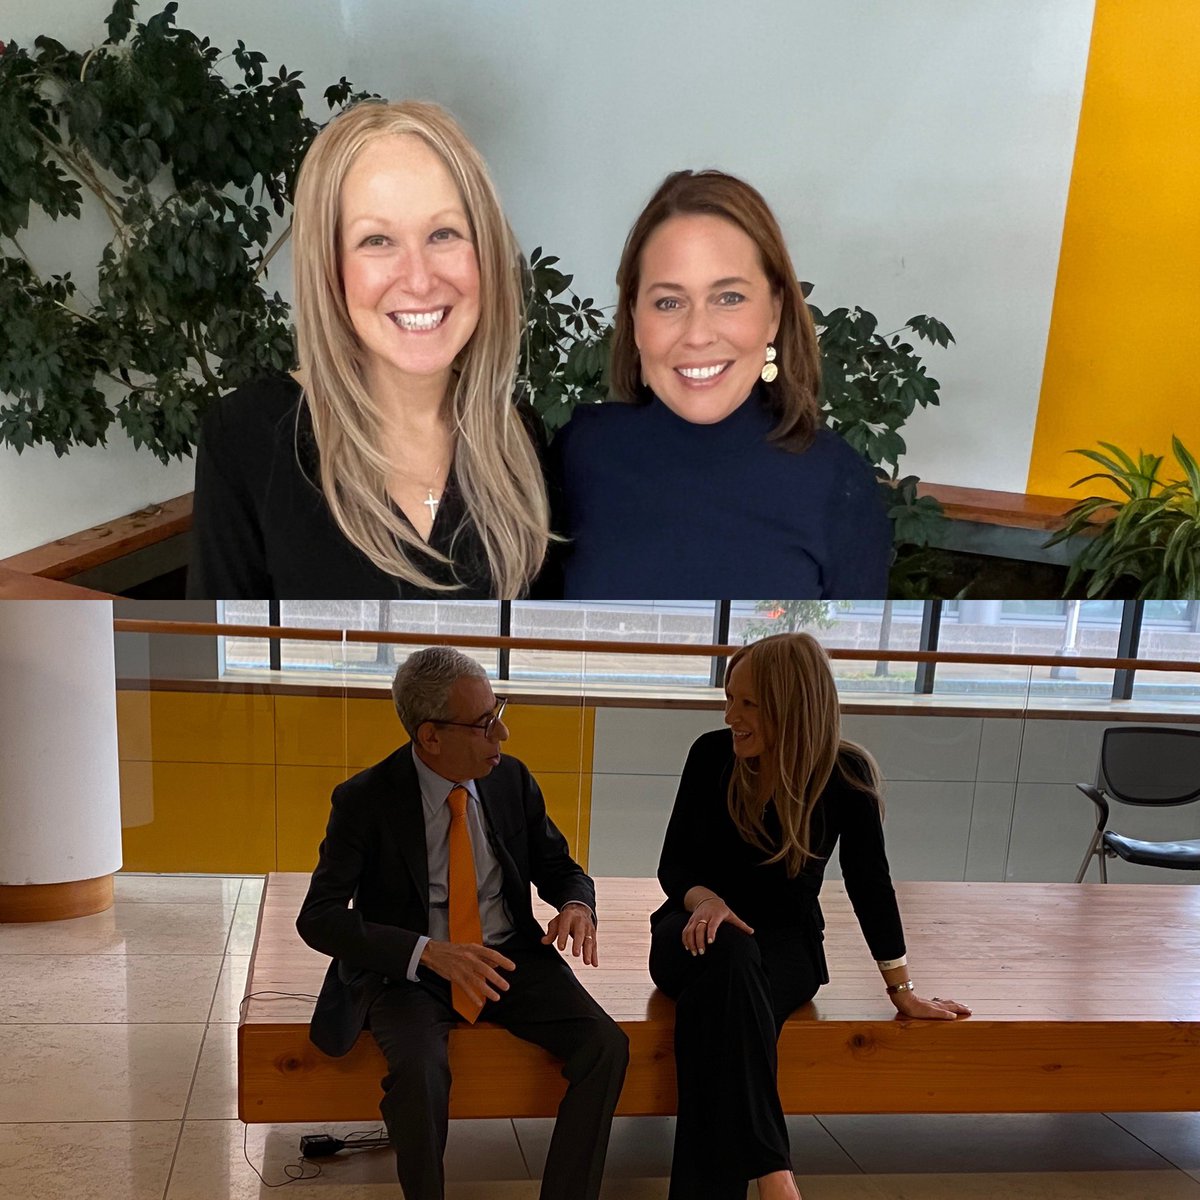 Great afternoon with 2 of my favorites @SarahCodyMedia & @ASCOPres @DrEricWiner at @YaleCancer @SmilowCancer raising awareness to #mbc & #breastfriendsfund 
Stay tuned story to come soon @WTNH #bcsm